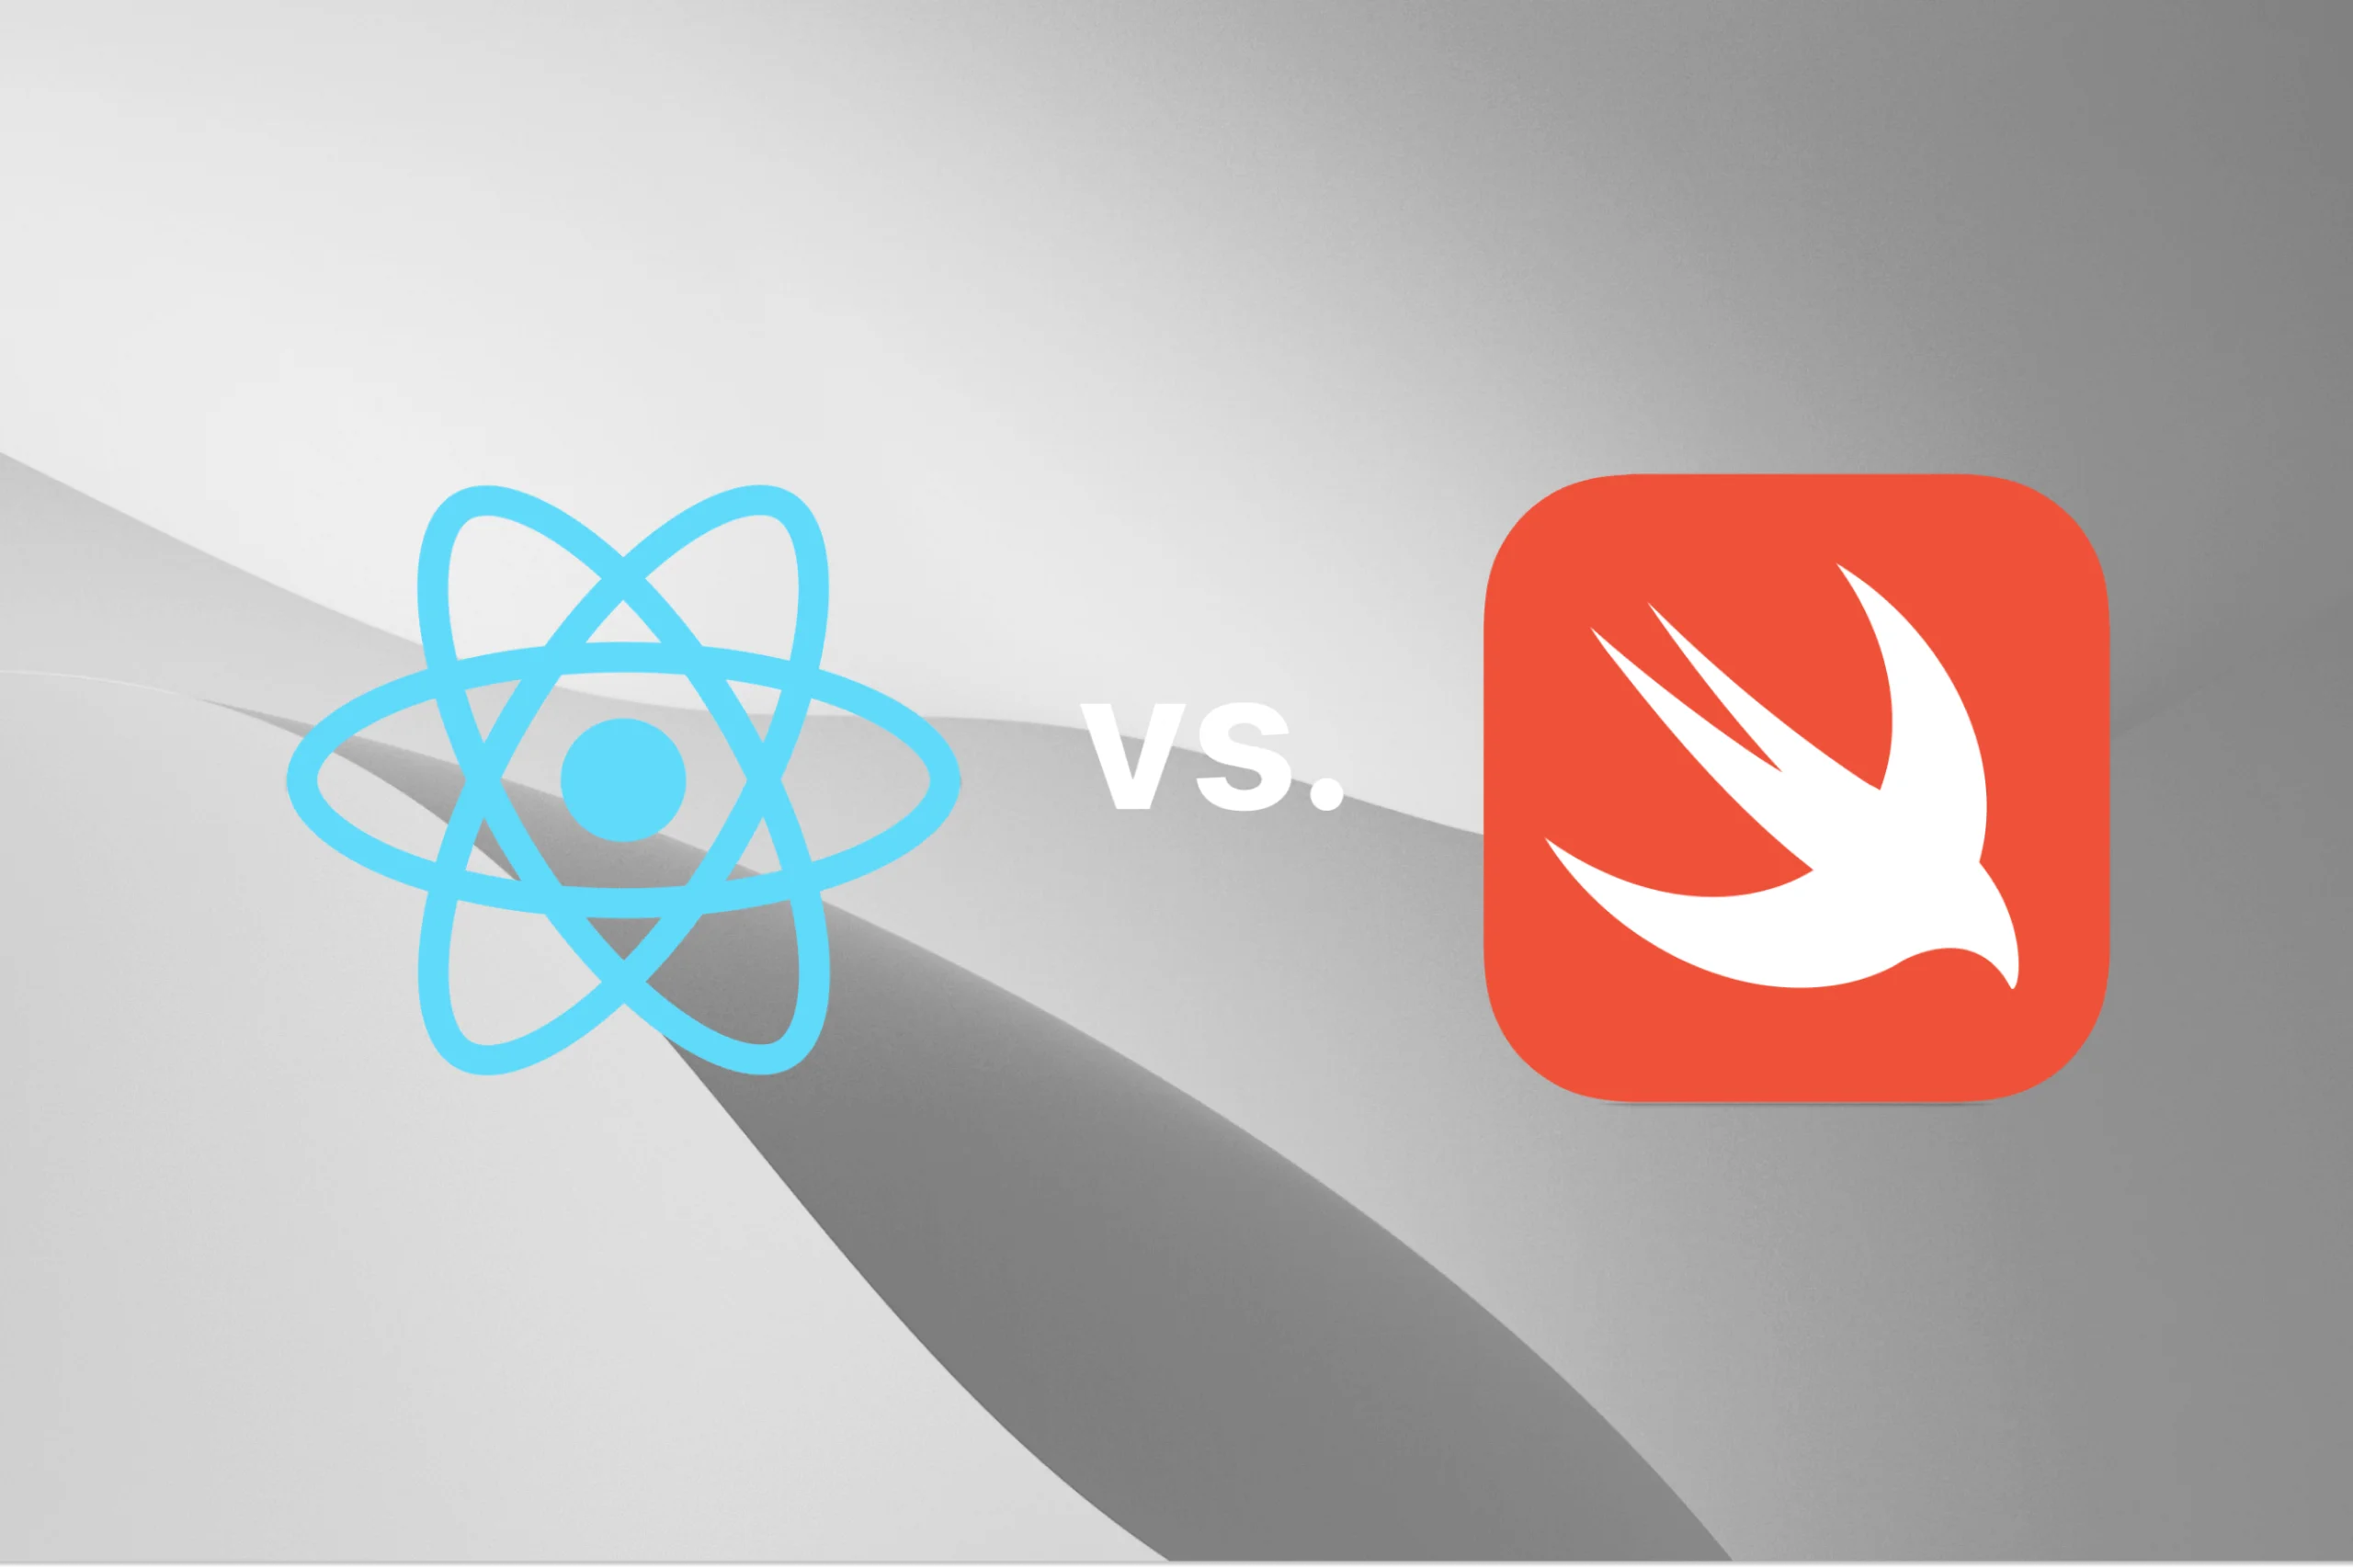 "React Native vs Swift: Which One to Choose in 2023 for an iOS Mobile Development?"